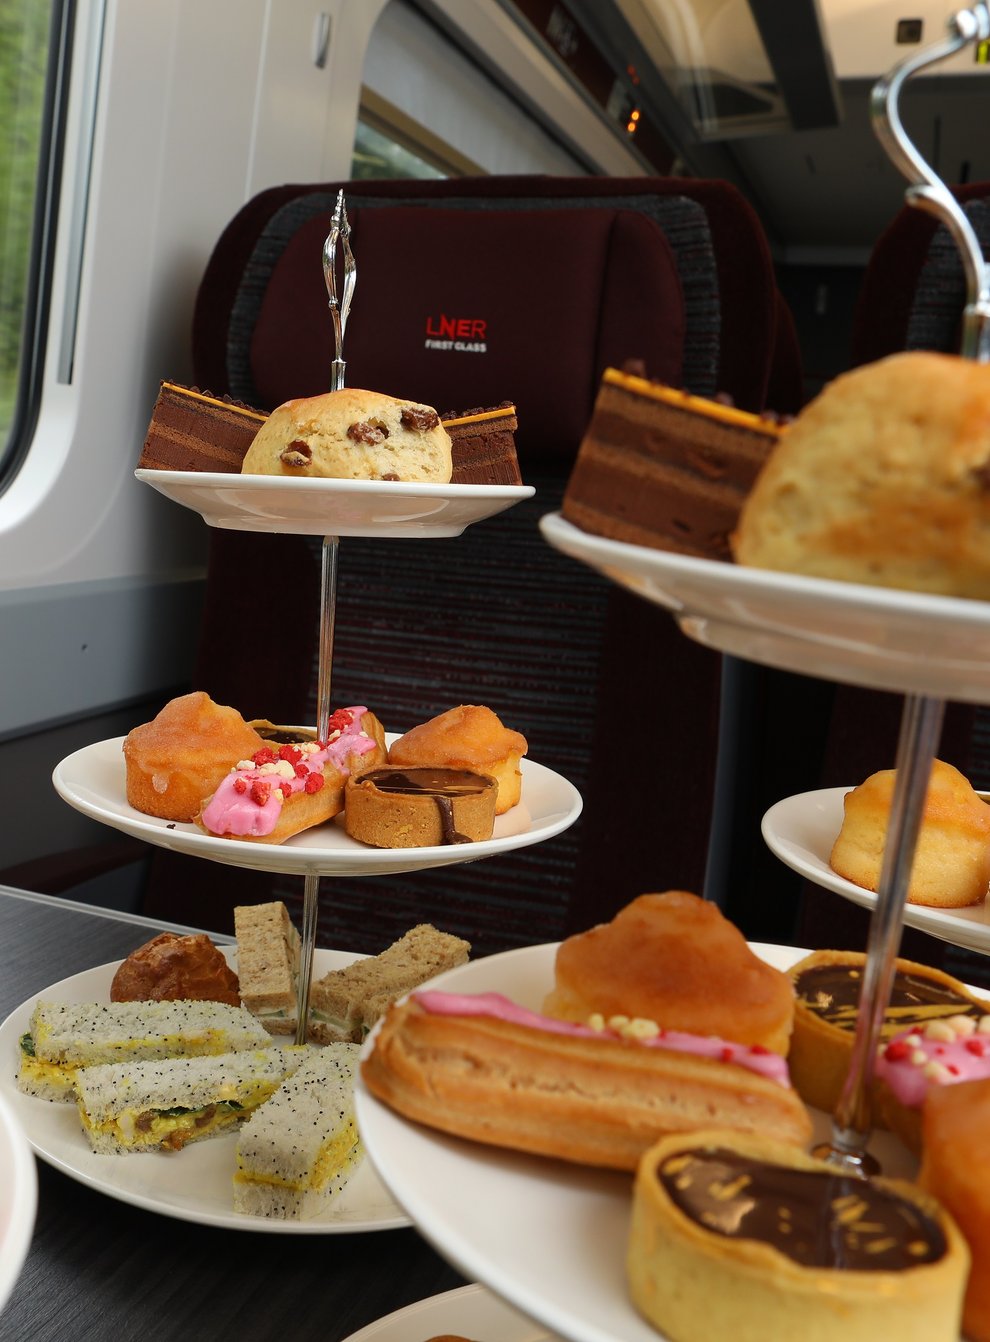 Afternoon tea was served on a train as part of efforts to encourage more people to return to rail travel (LNER/PA)